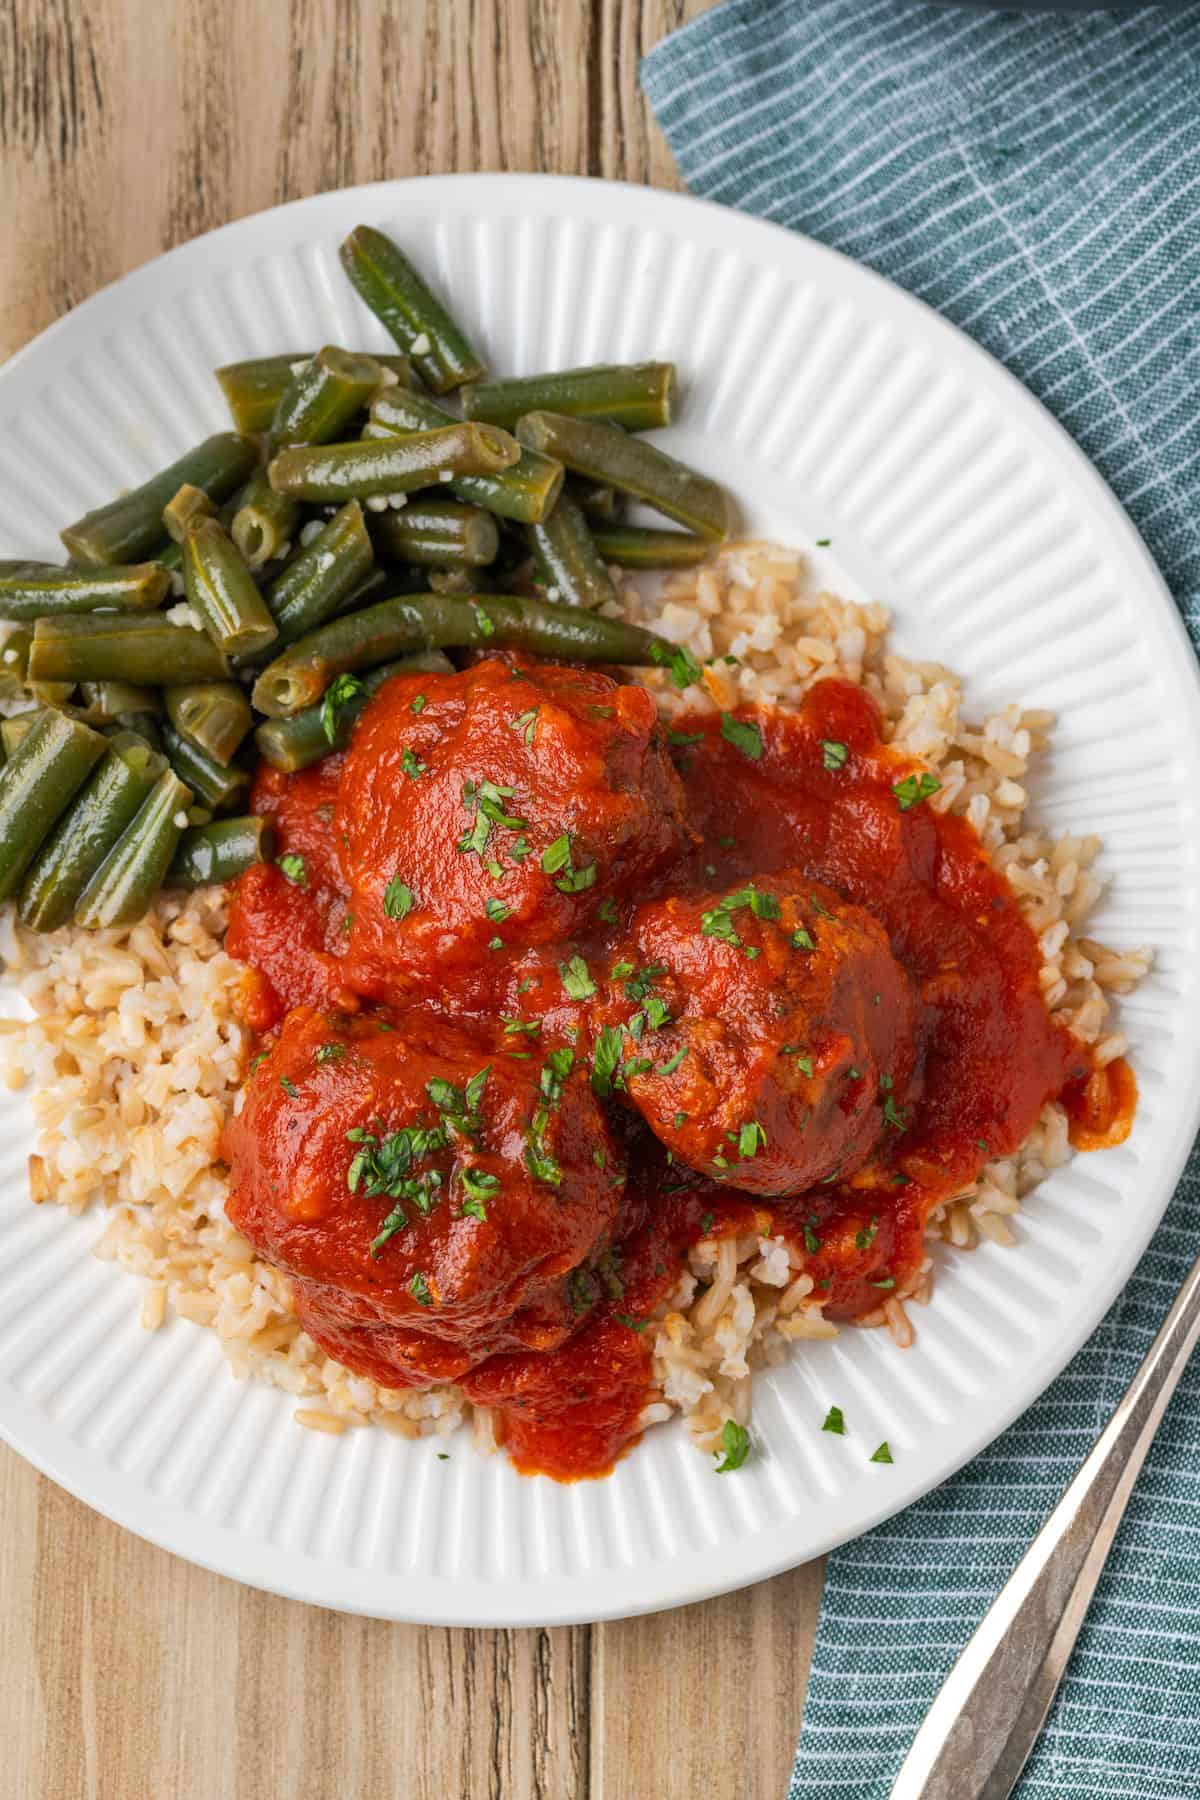 Porcupine meatballs served over rice with green beans are shown on a white plate with a fork and blue napkin to the right.